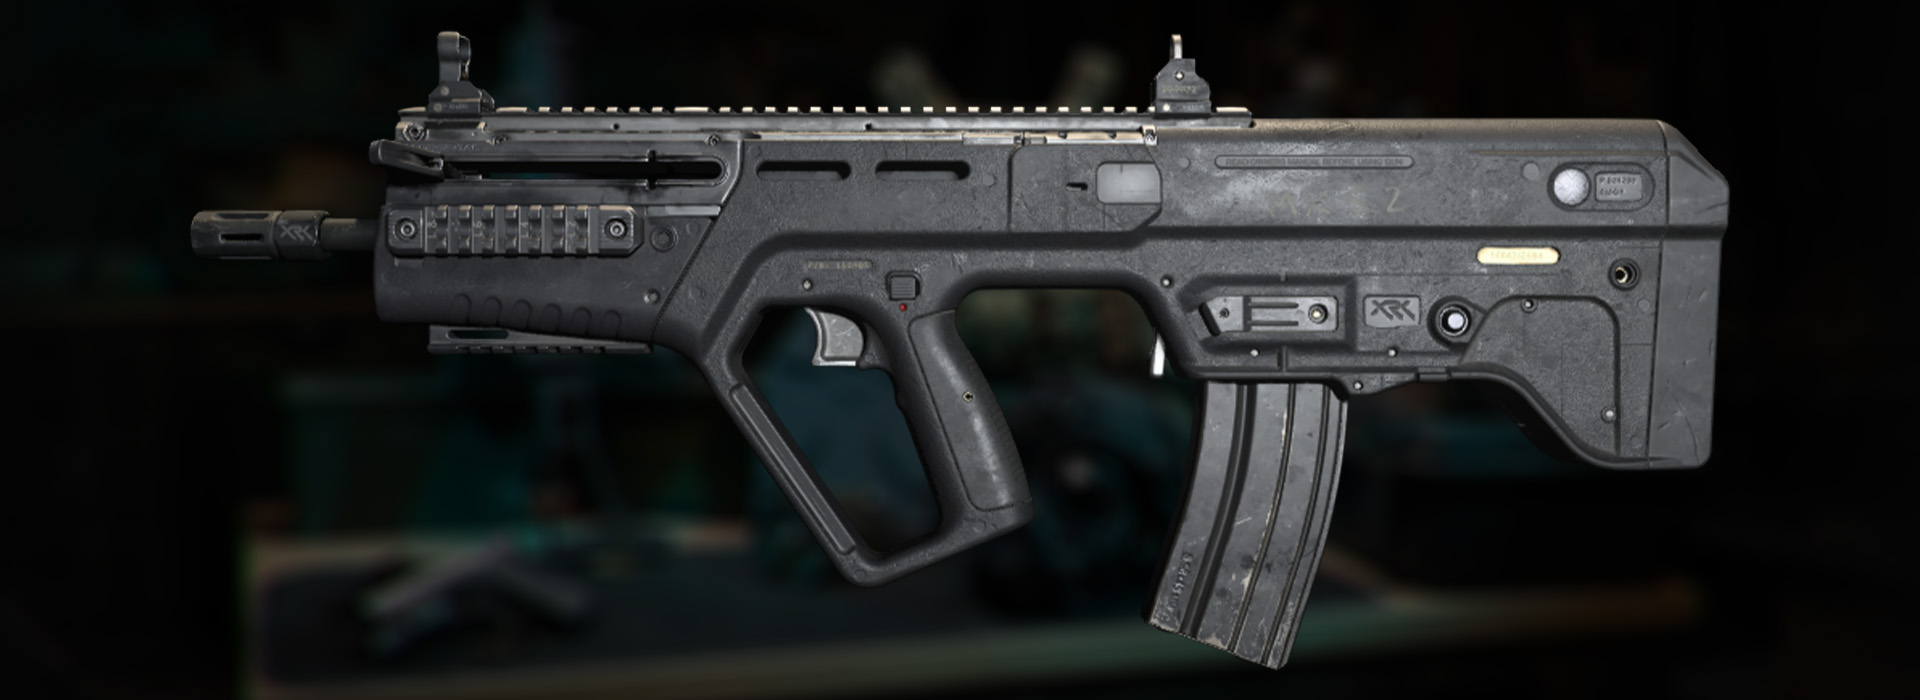 Ram-7 Assault Rifle in Call of Duty MW3 and Warzone